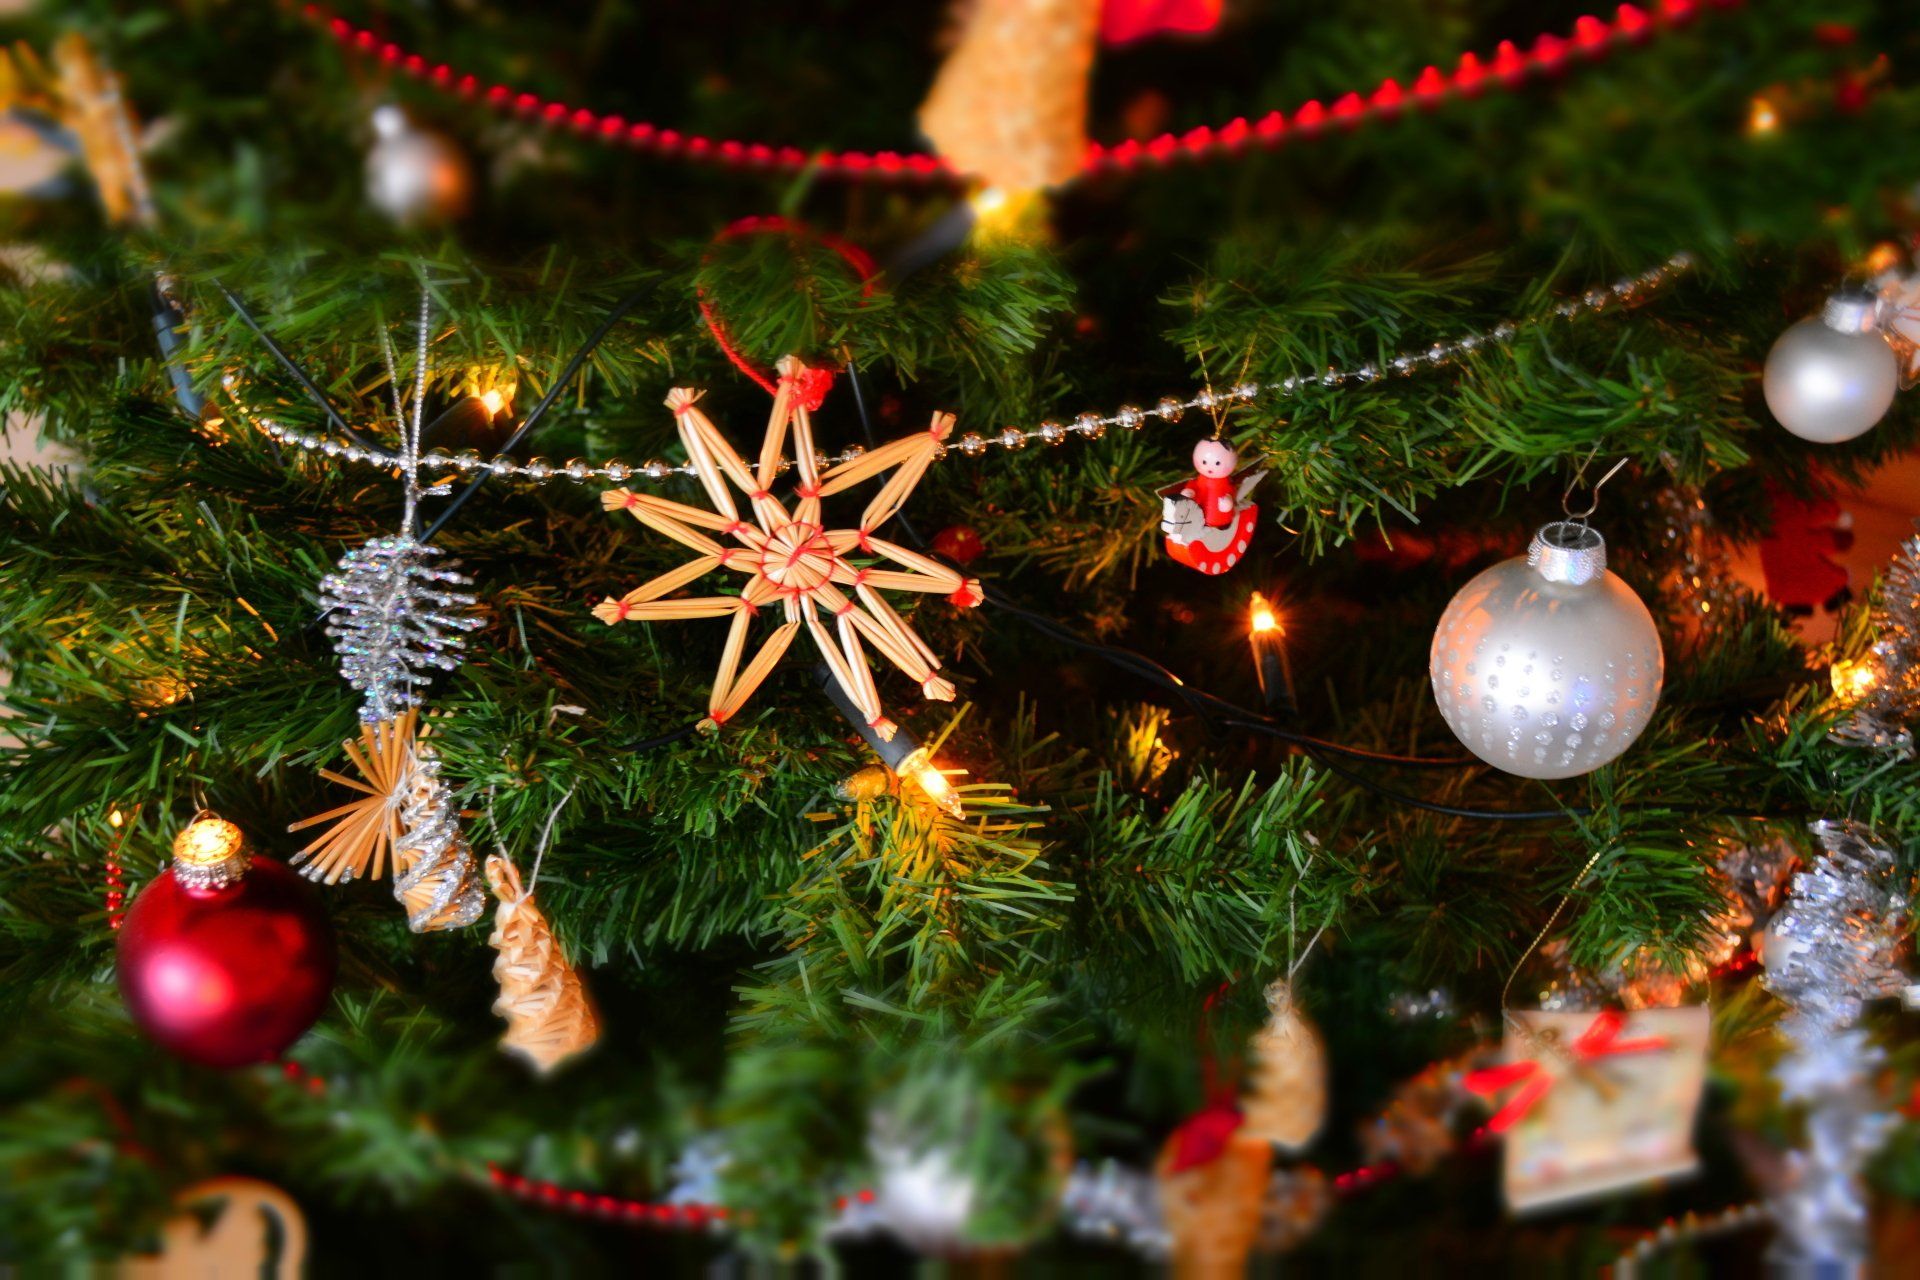 A close up of a Christmas tree with decorations and lights.